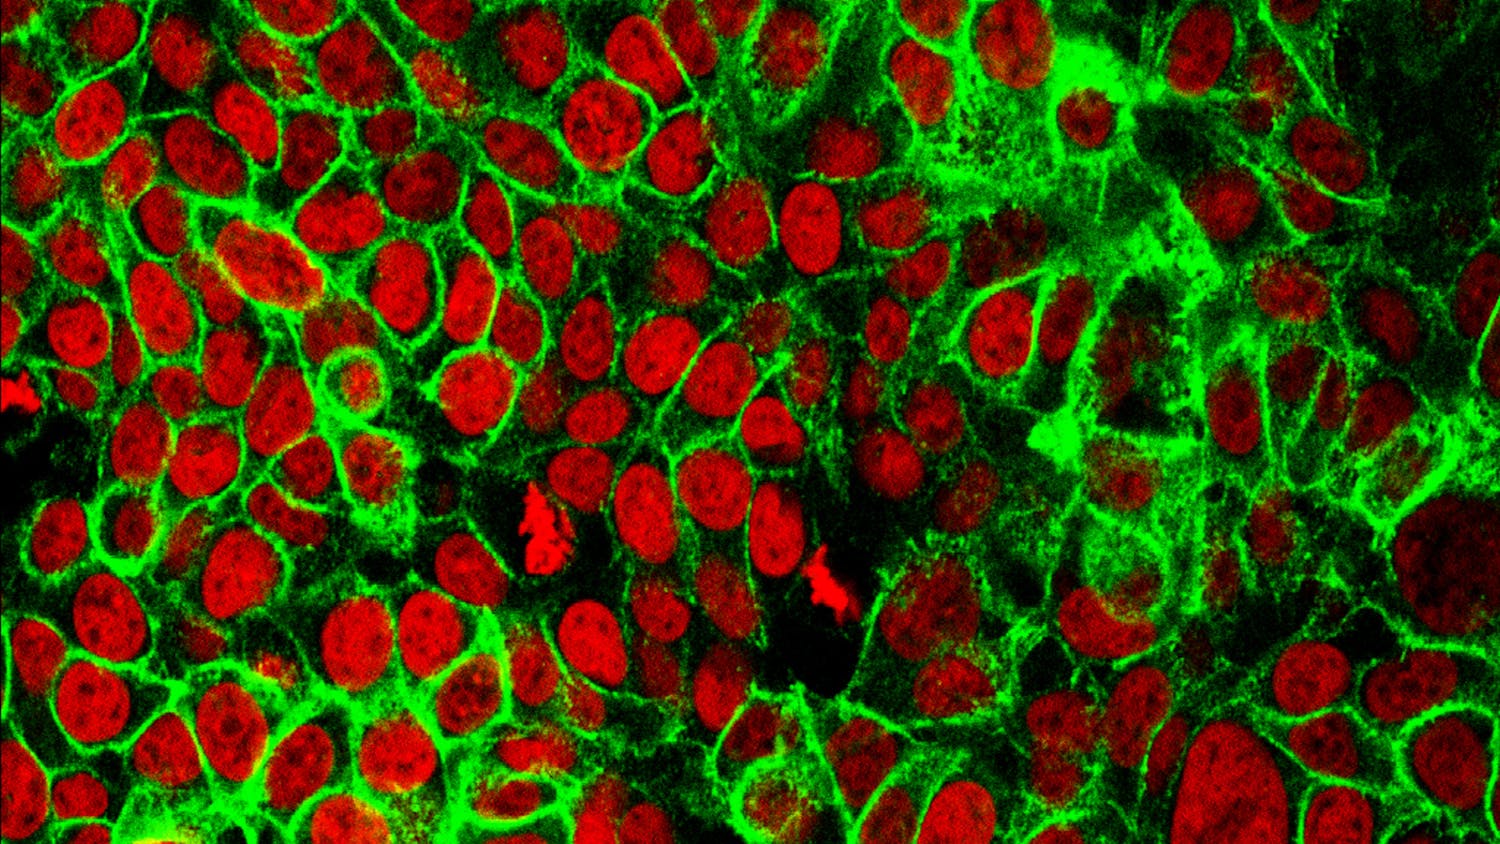 Researchers from the University of California San Francisco believe they have found a new way to treat a specific mutation in some cancers through immunotherapy. (Flickr/Human Colon Cancer Cells by NIH Image Gallery)